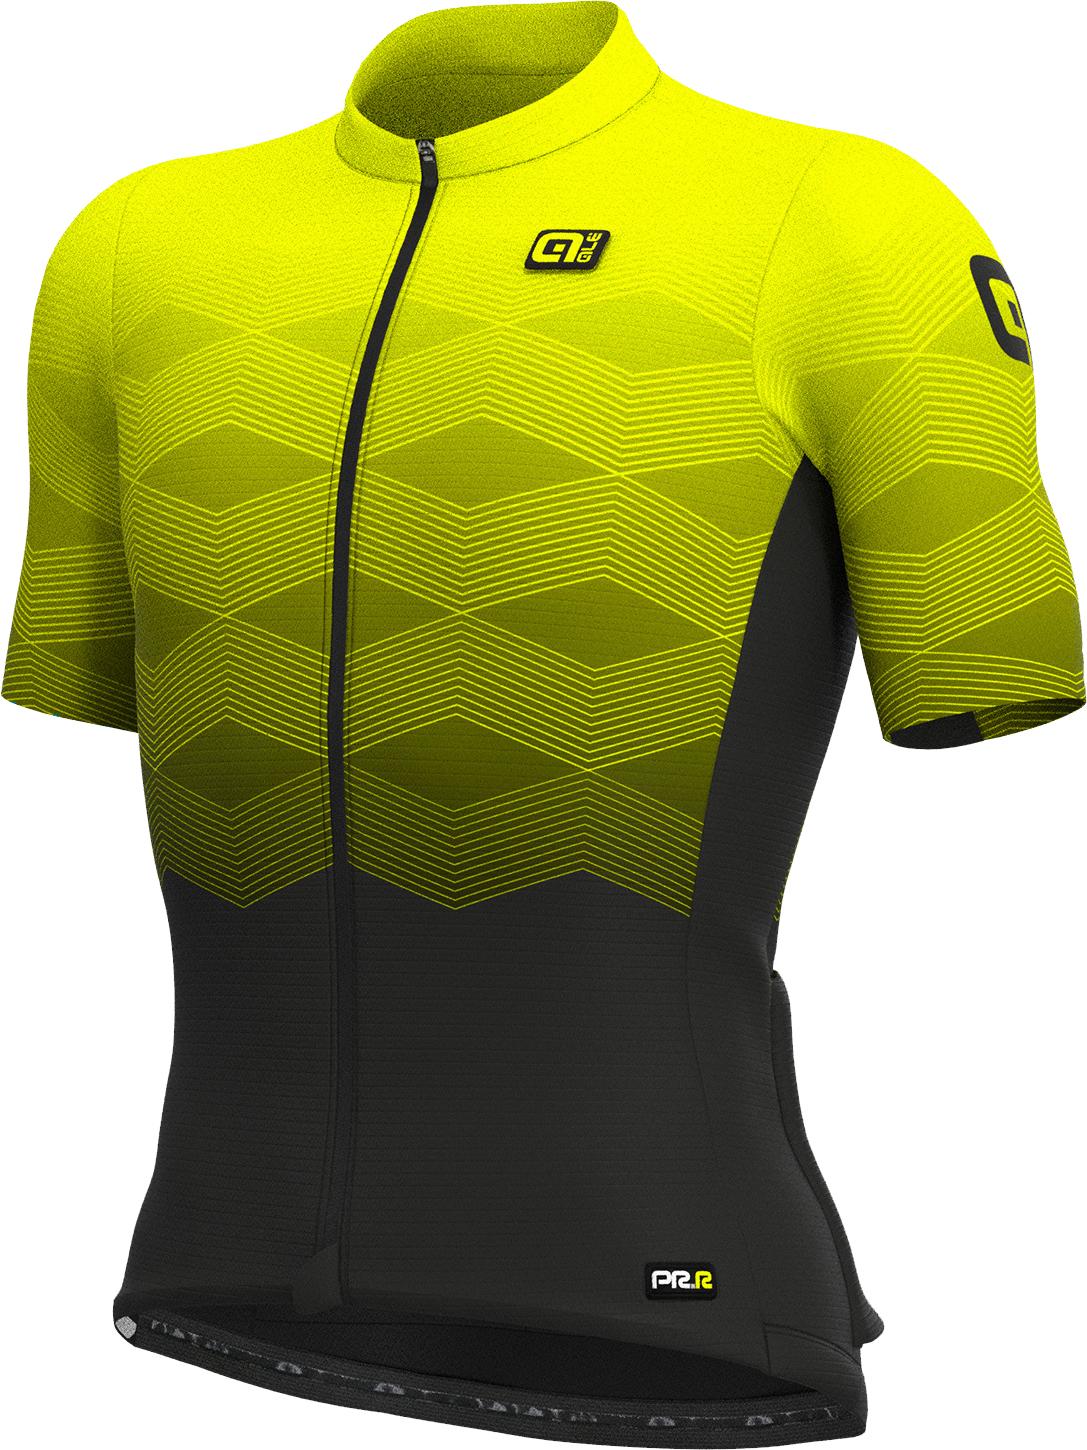 Al Prr Magnitude Cycling Jersey - Fluorescent Yellow